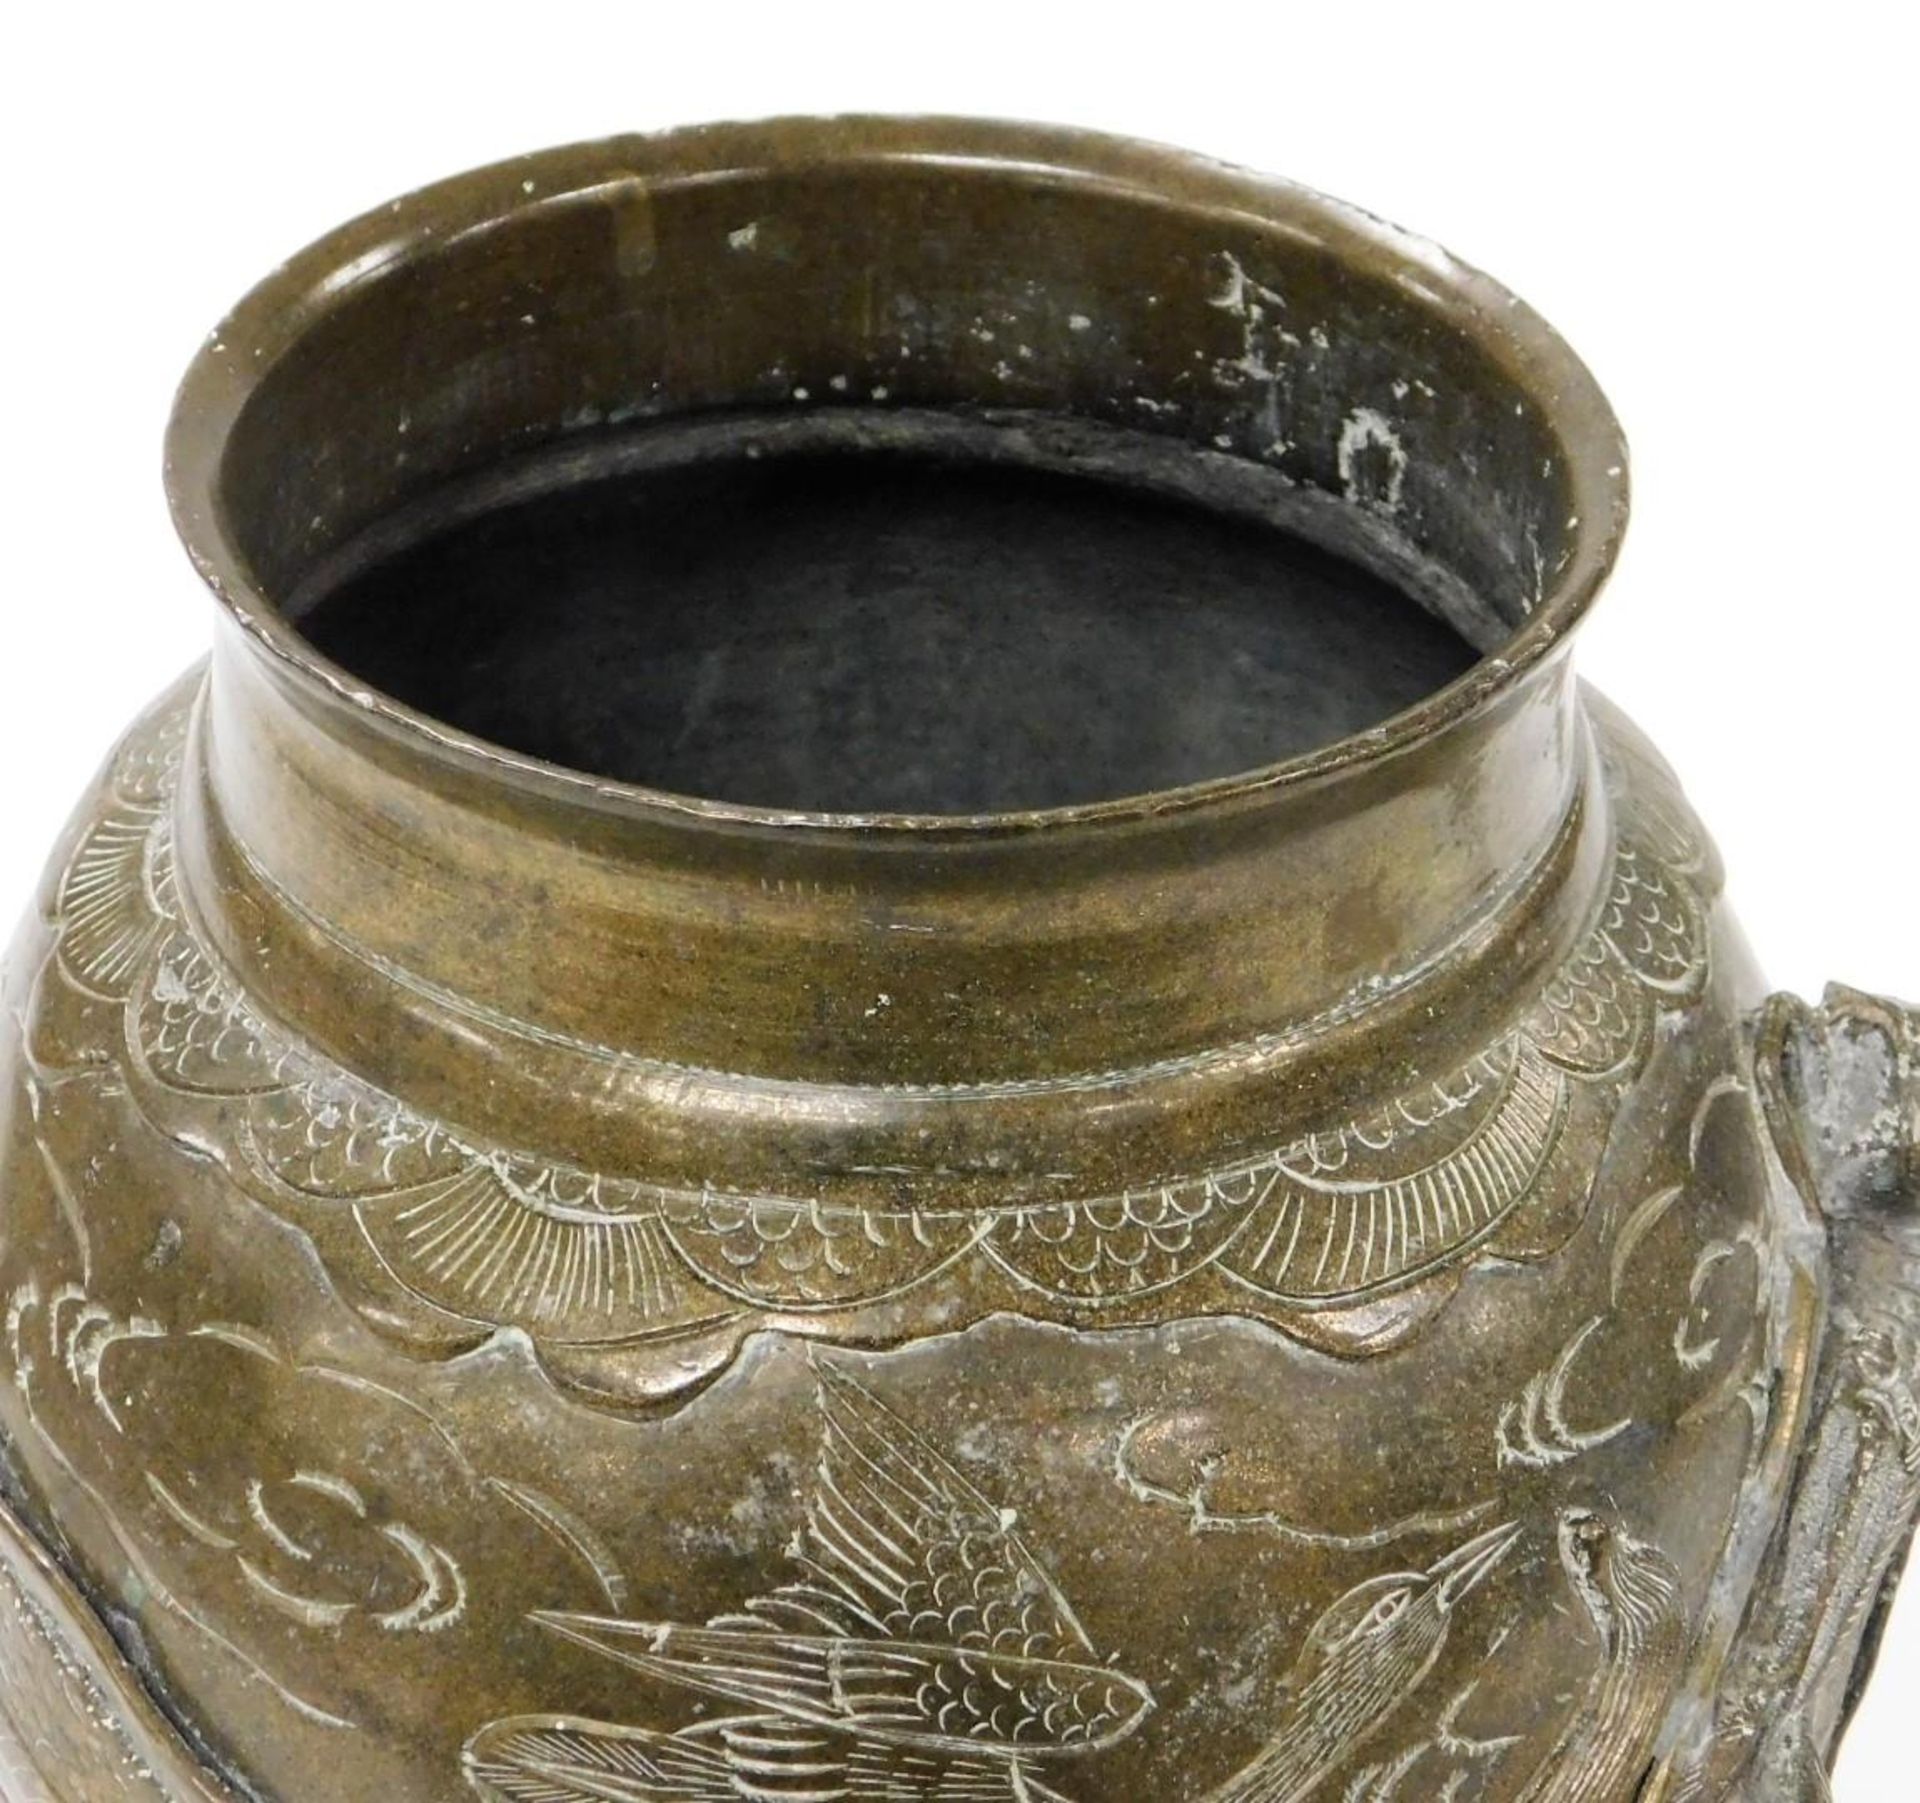 A Meiji period Japanese bronze vase, decorated in relief with a dragon and engraved with geese, 26cm - Image 5 of 6